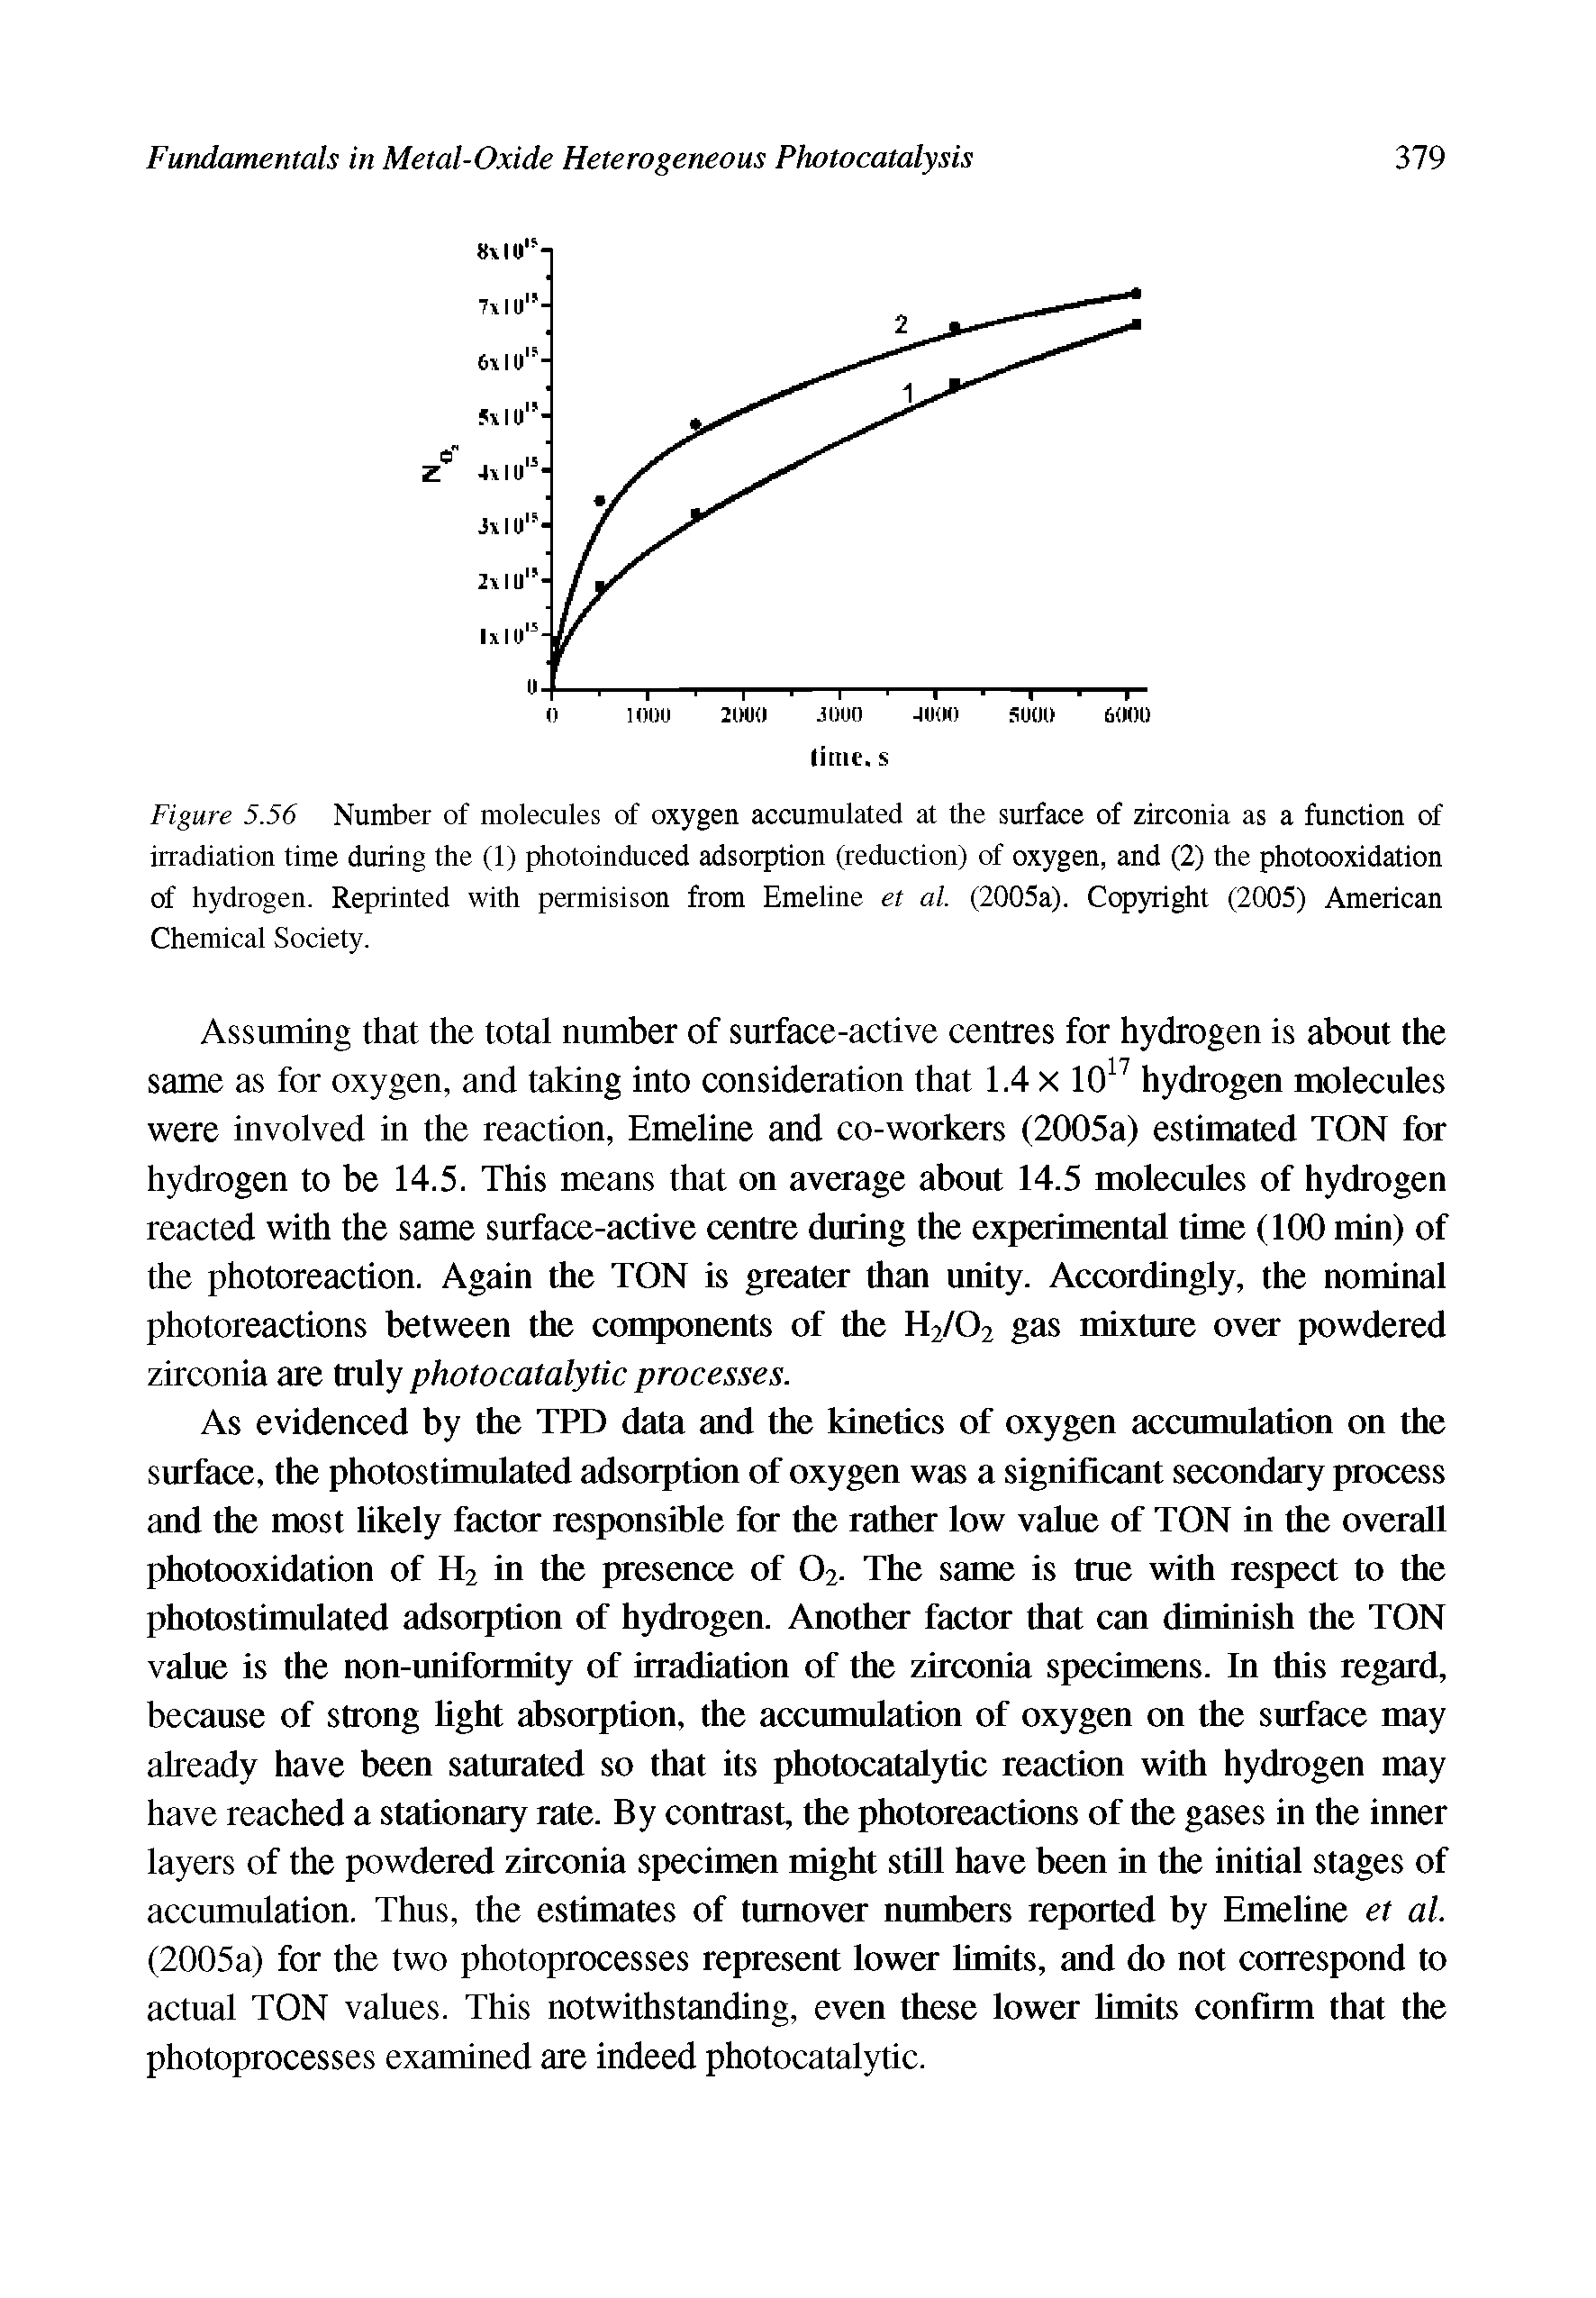 Figure 5.56 Number of molecules of oxygen accumulated at the surface of zirconia as a function of irradiation time during the (1) photoinduced adsorption (reduction) of oxygen, and (2) the photooxidation of hydrogen. Reprinted with permisison from Emeline et al. (2005a). Copyright (2005) American Chemical Society.